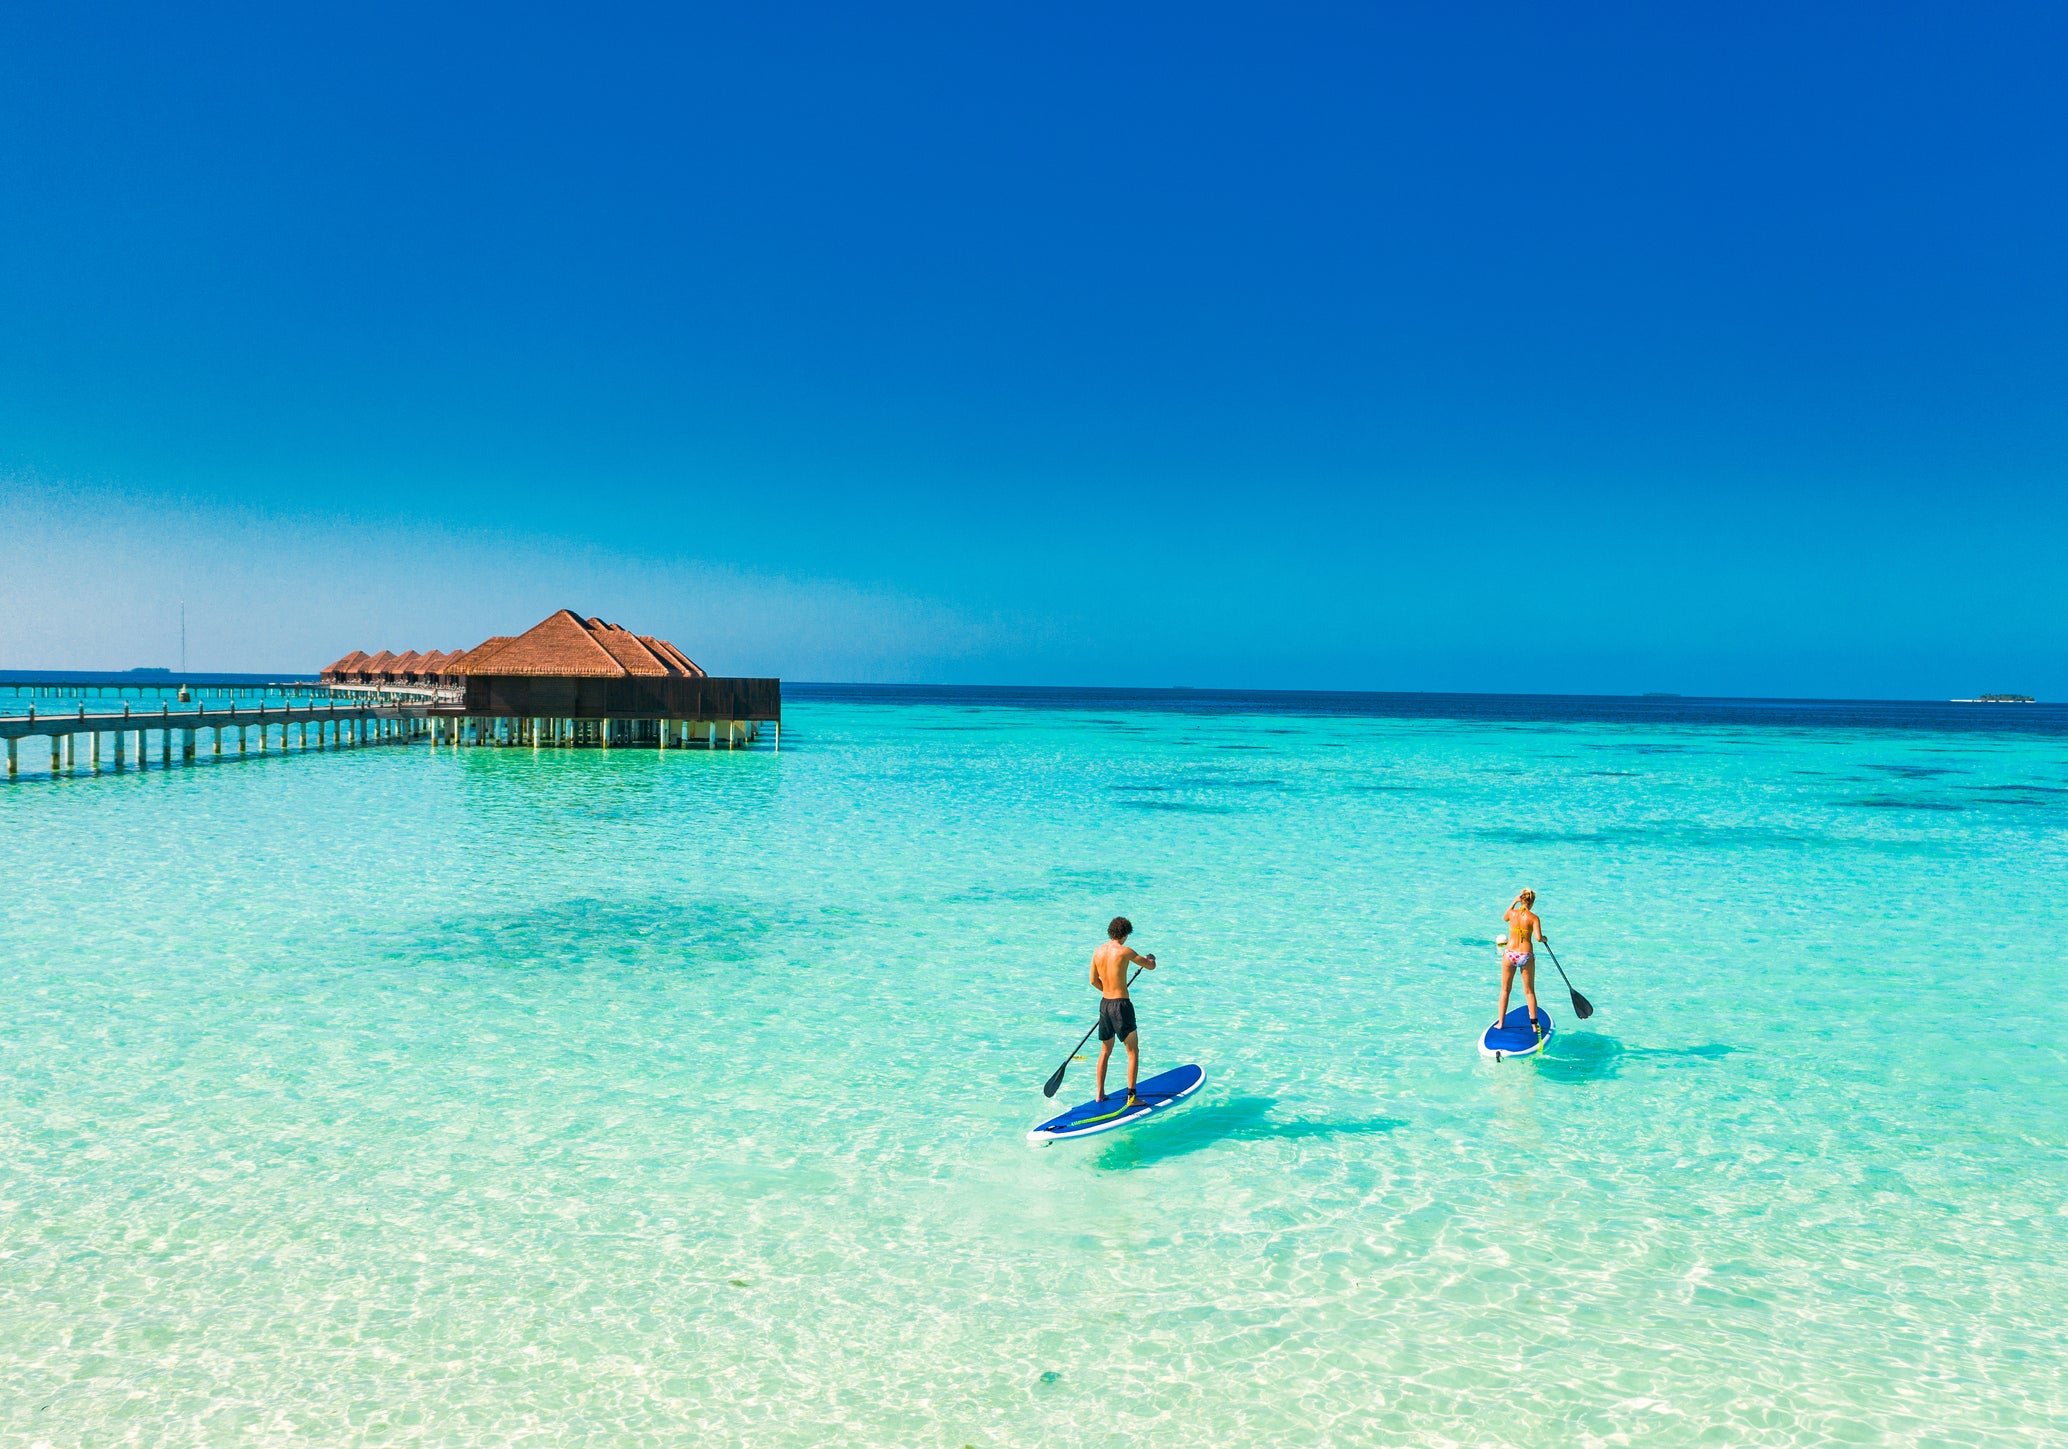 The Maldives is a honeymoon hot spot for couples of all ages